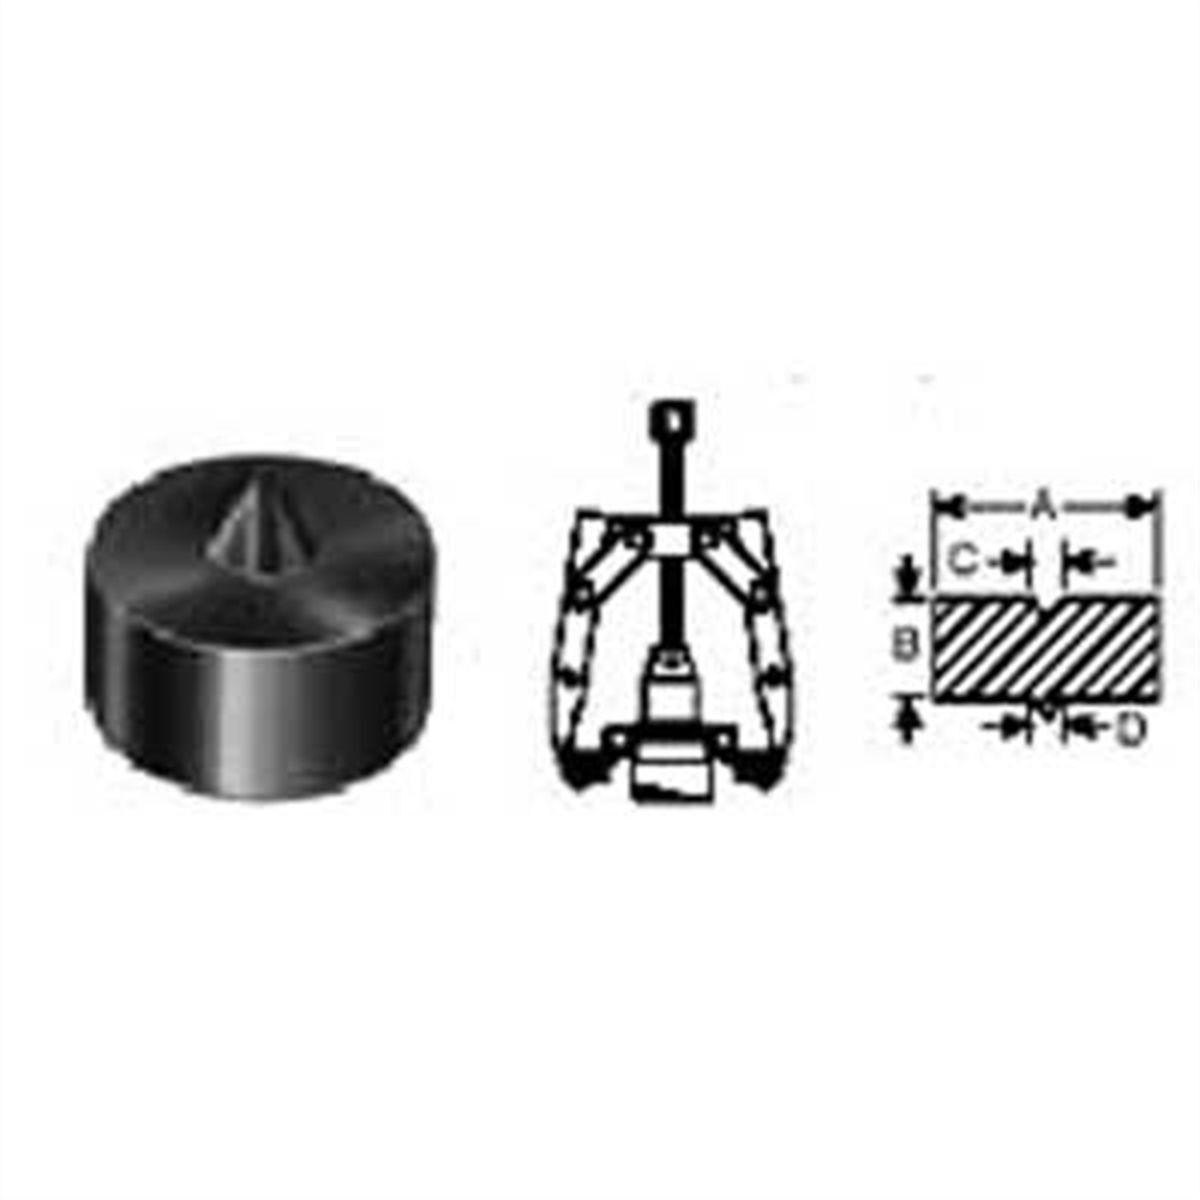 Puller Adapter Shaft Protector 5/8 X 5/8 In - 3/16 In